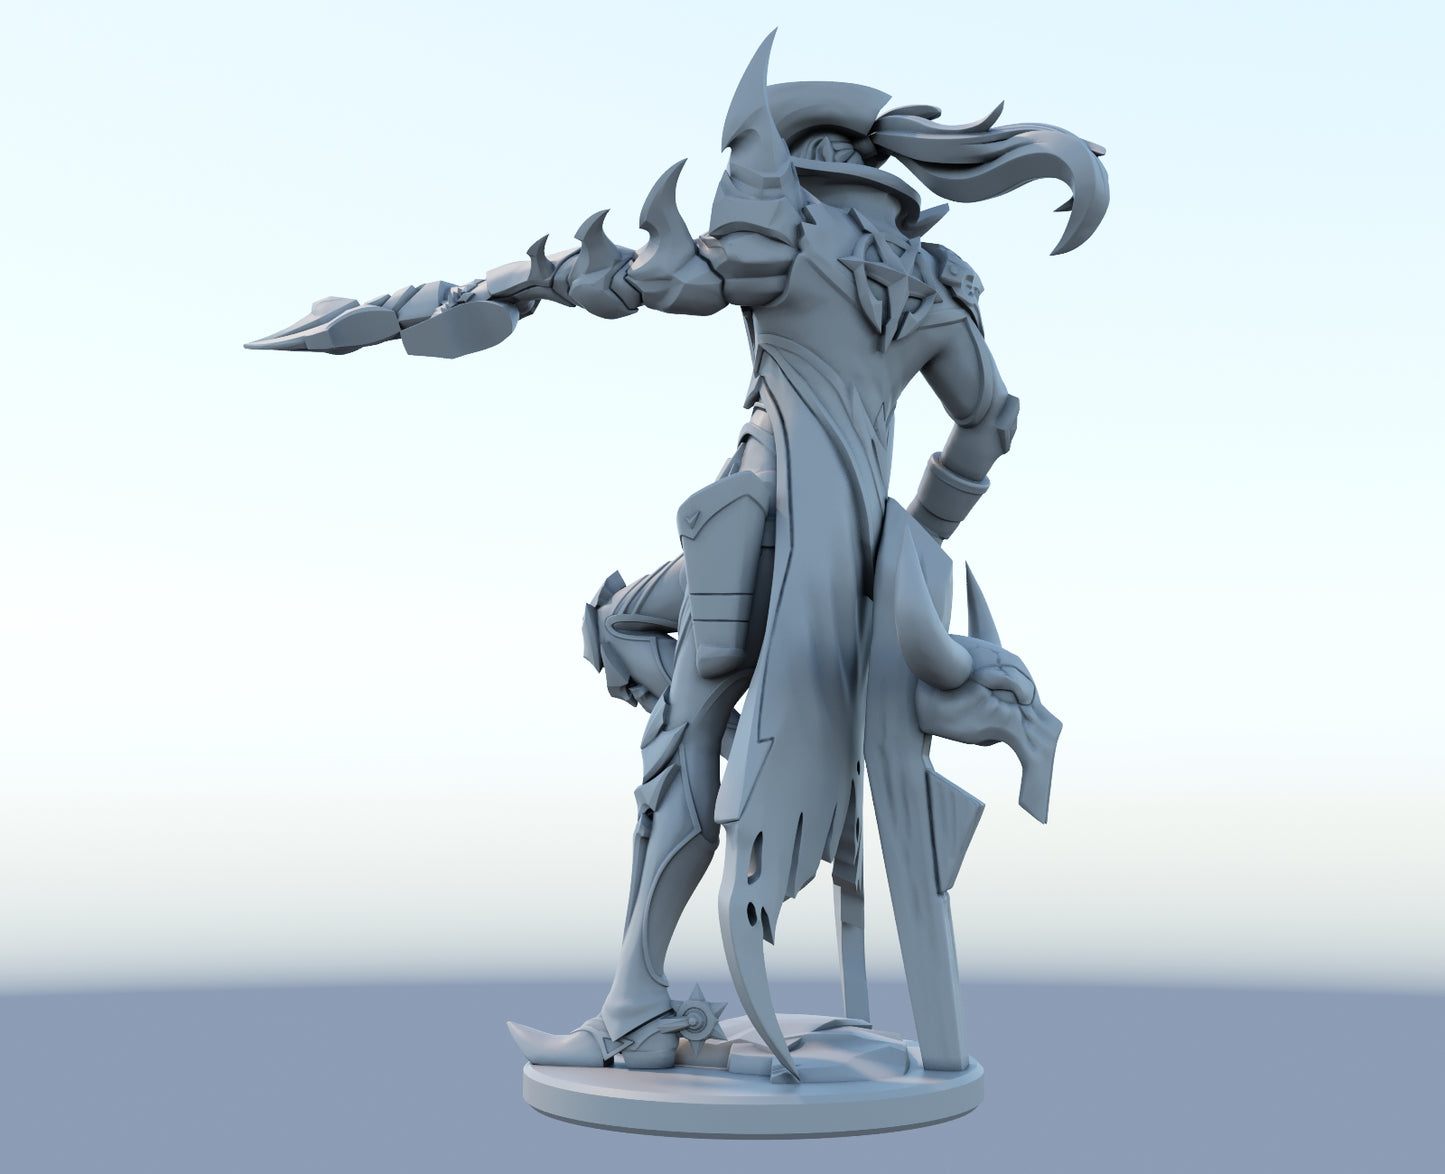 High Noon Lucian 3D-printed League of Legends champion figure. Decorate your gaming setup or home with your favorite League of Legends champion! Choose between the unpainted version, perfect for you to paint yourself, or the hand-painted version by a professional painter. Order your figure today!